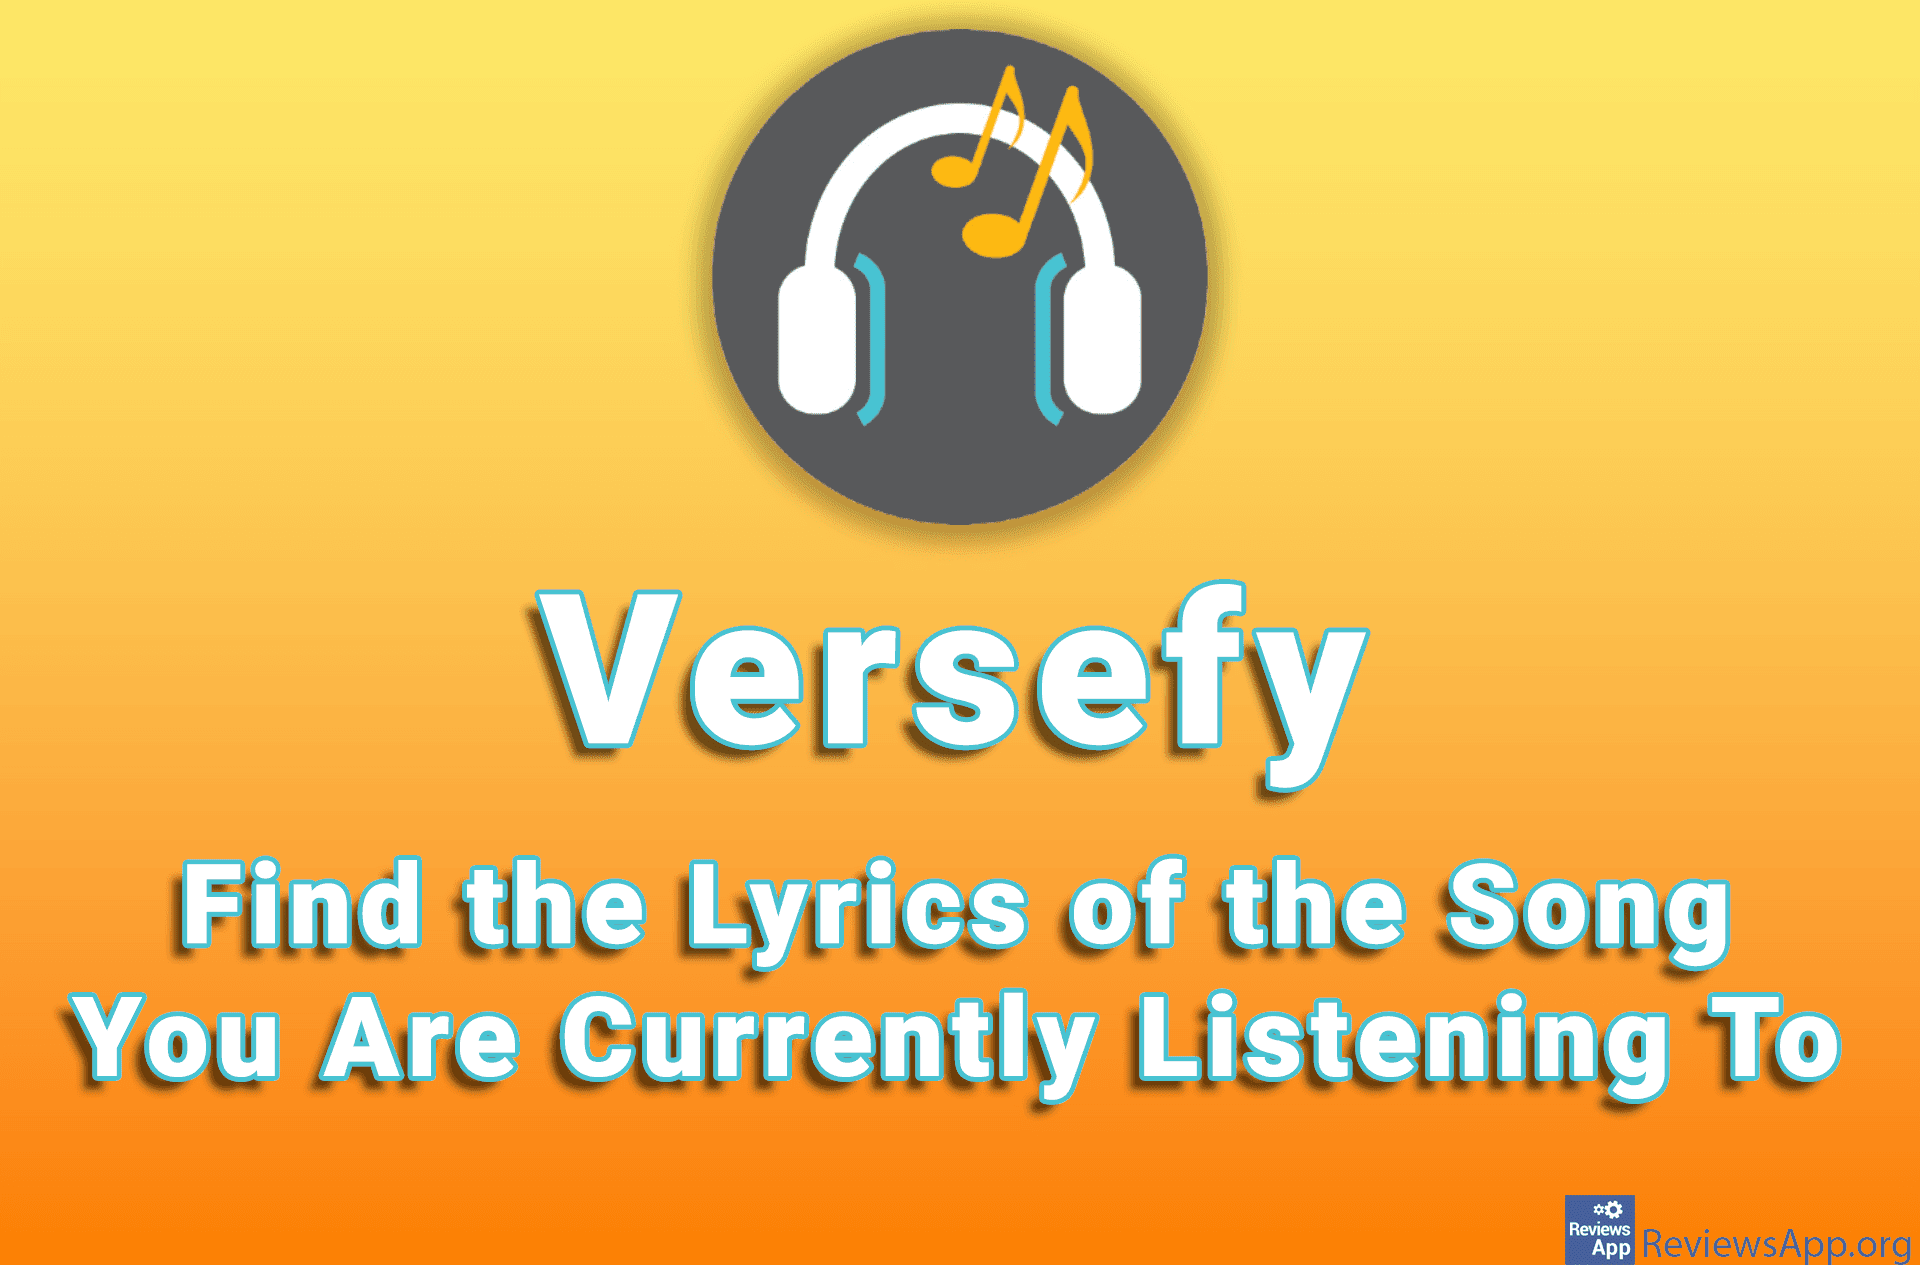 Versefy – Find the Lyrics of the Song You Are Currently Listening To